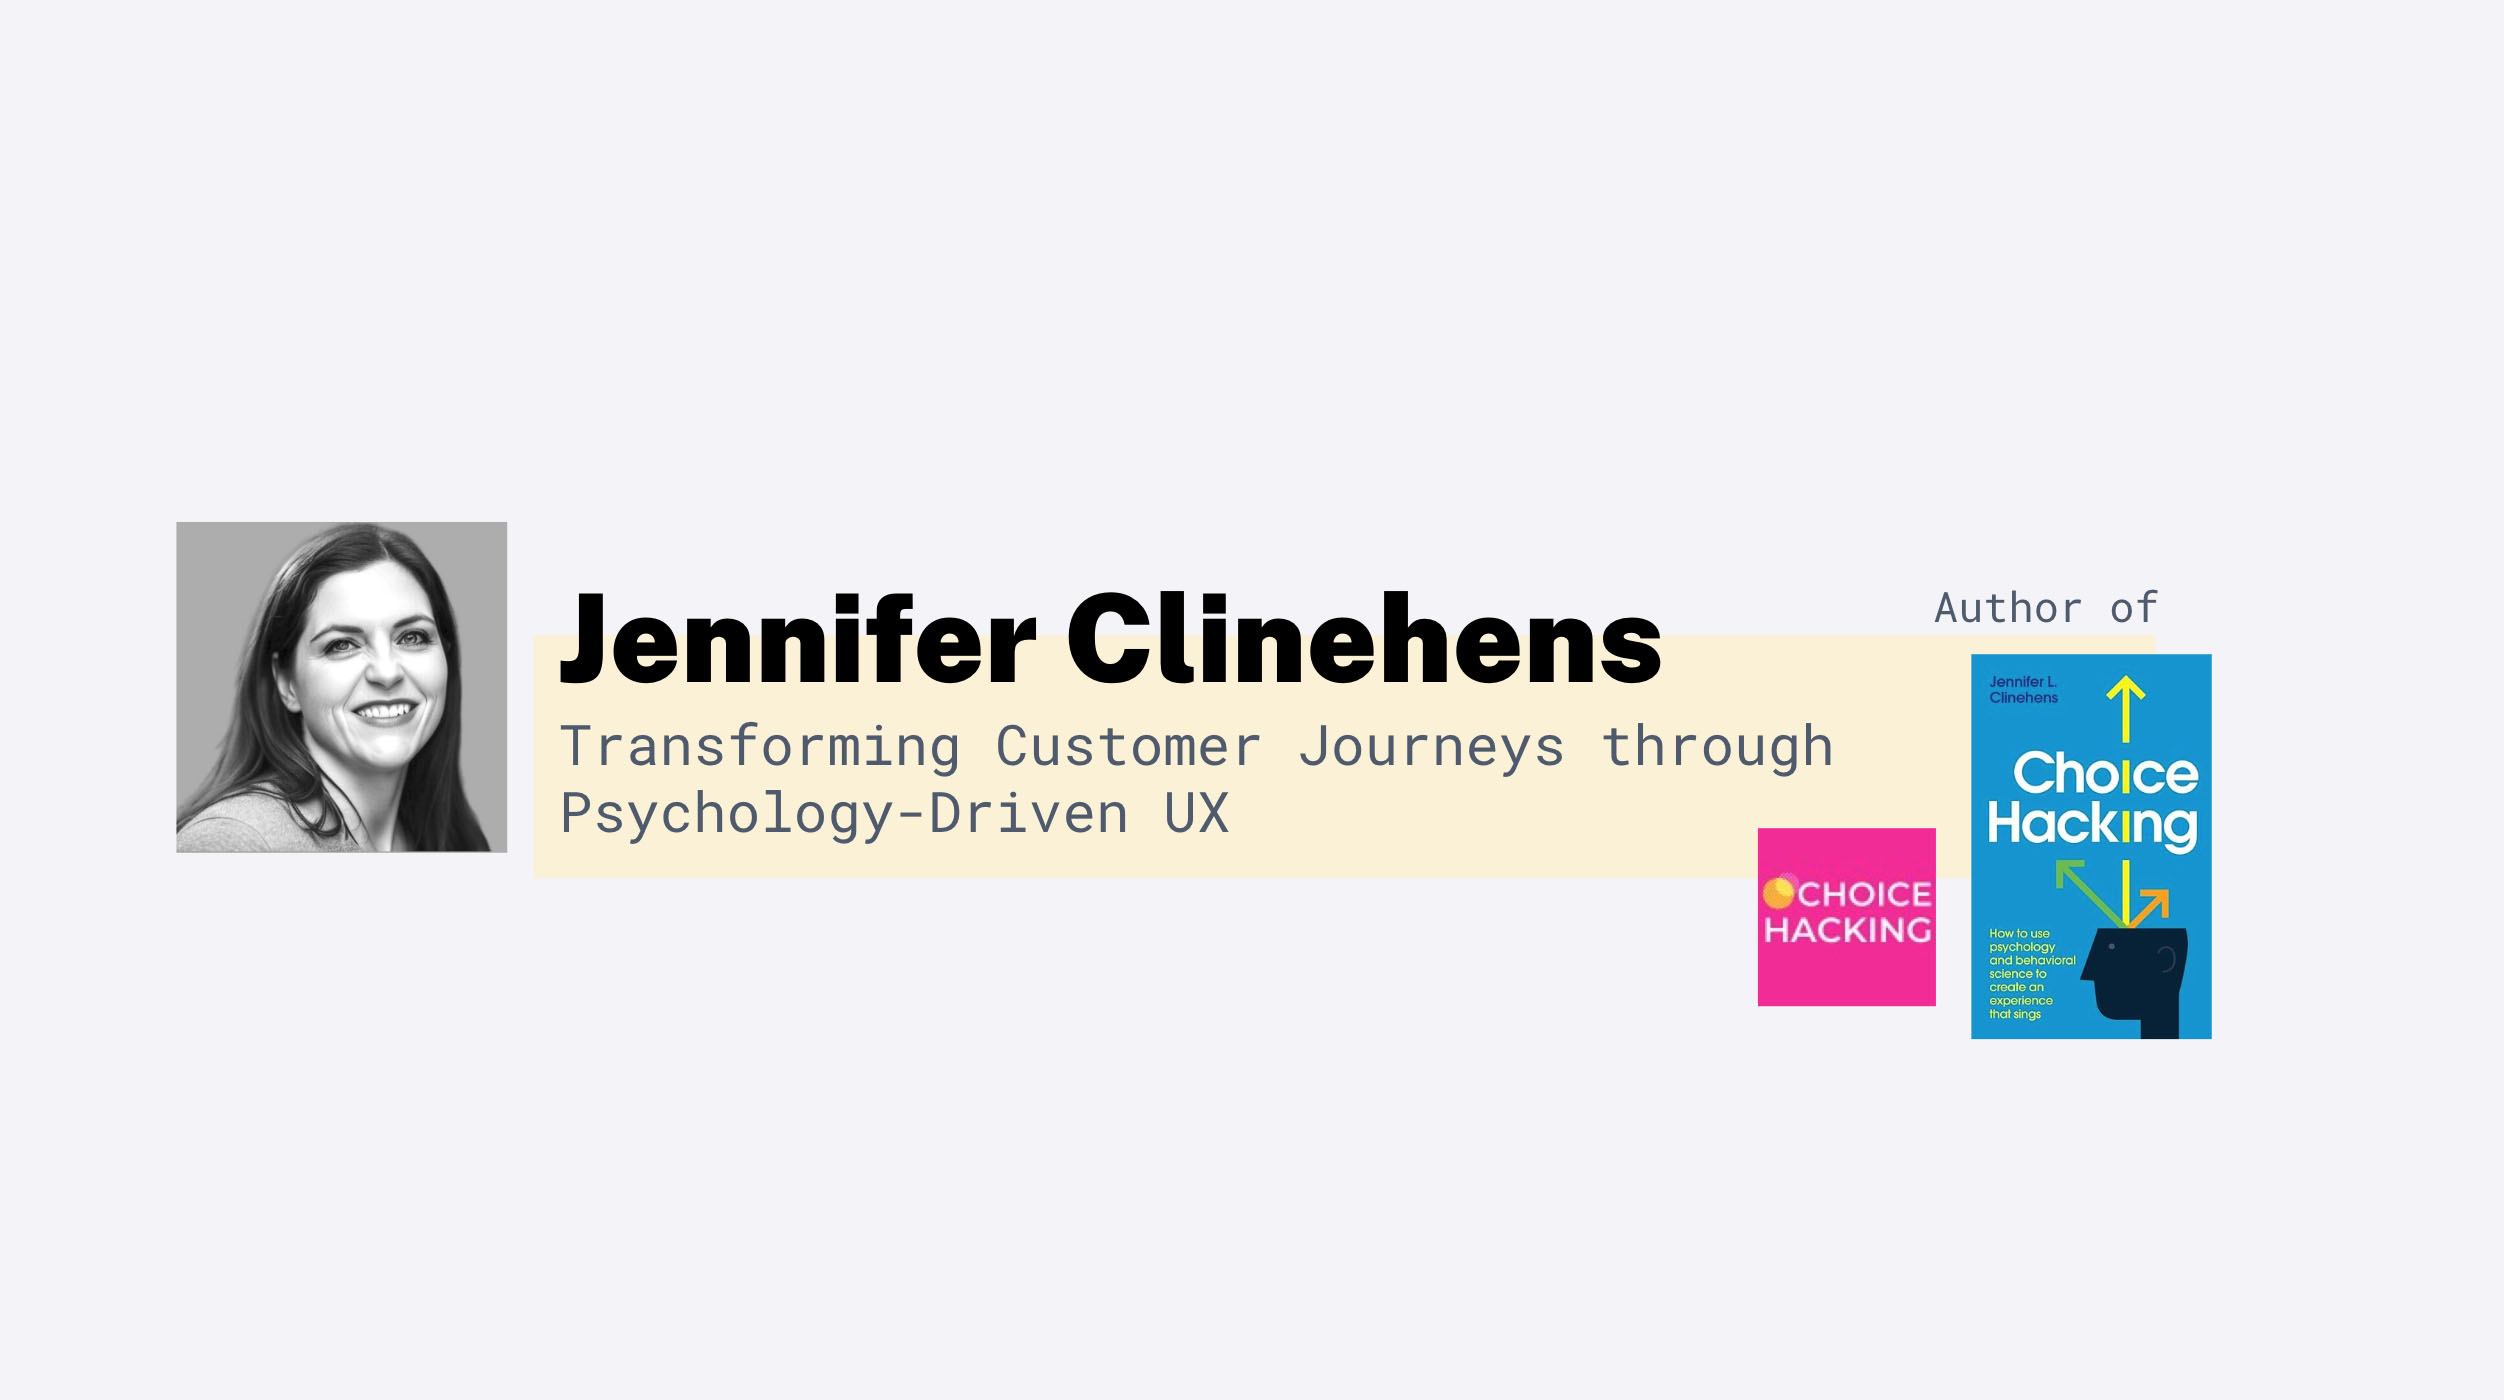 Transforming the Customer Journey through Psychology-Driven UX